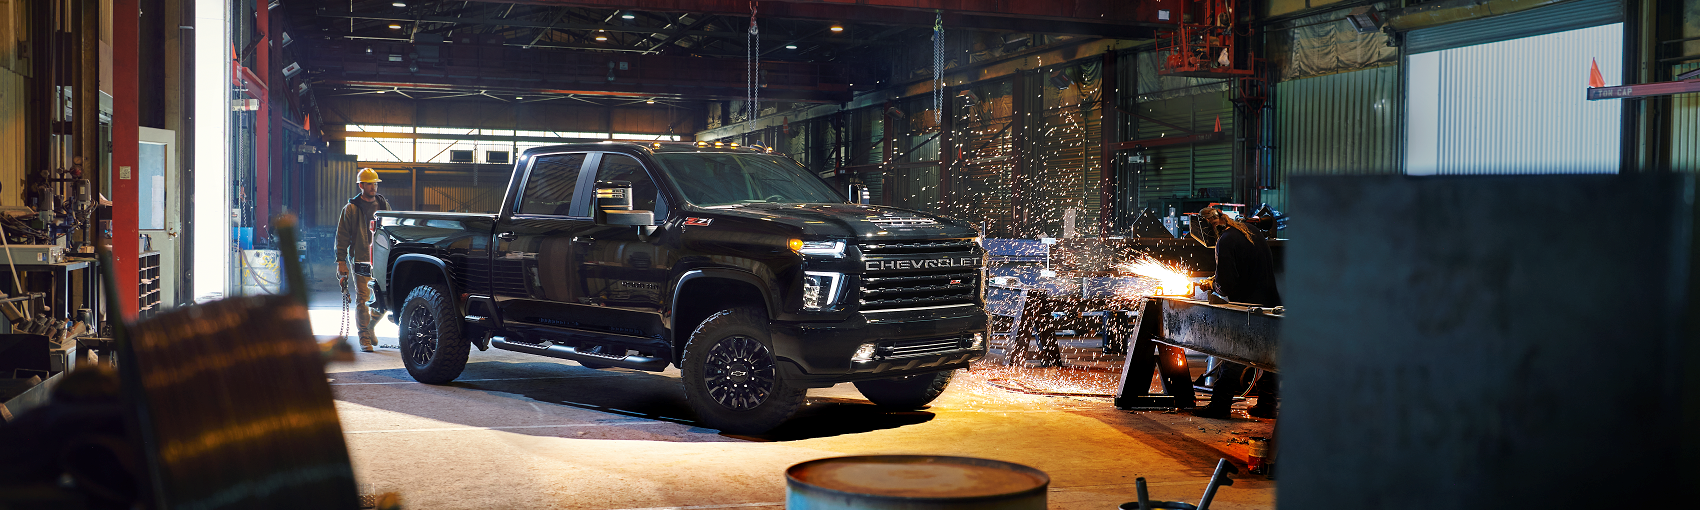 2021 Chevy Silverado 2500 in black is a high powered work truck